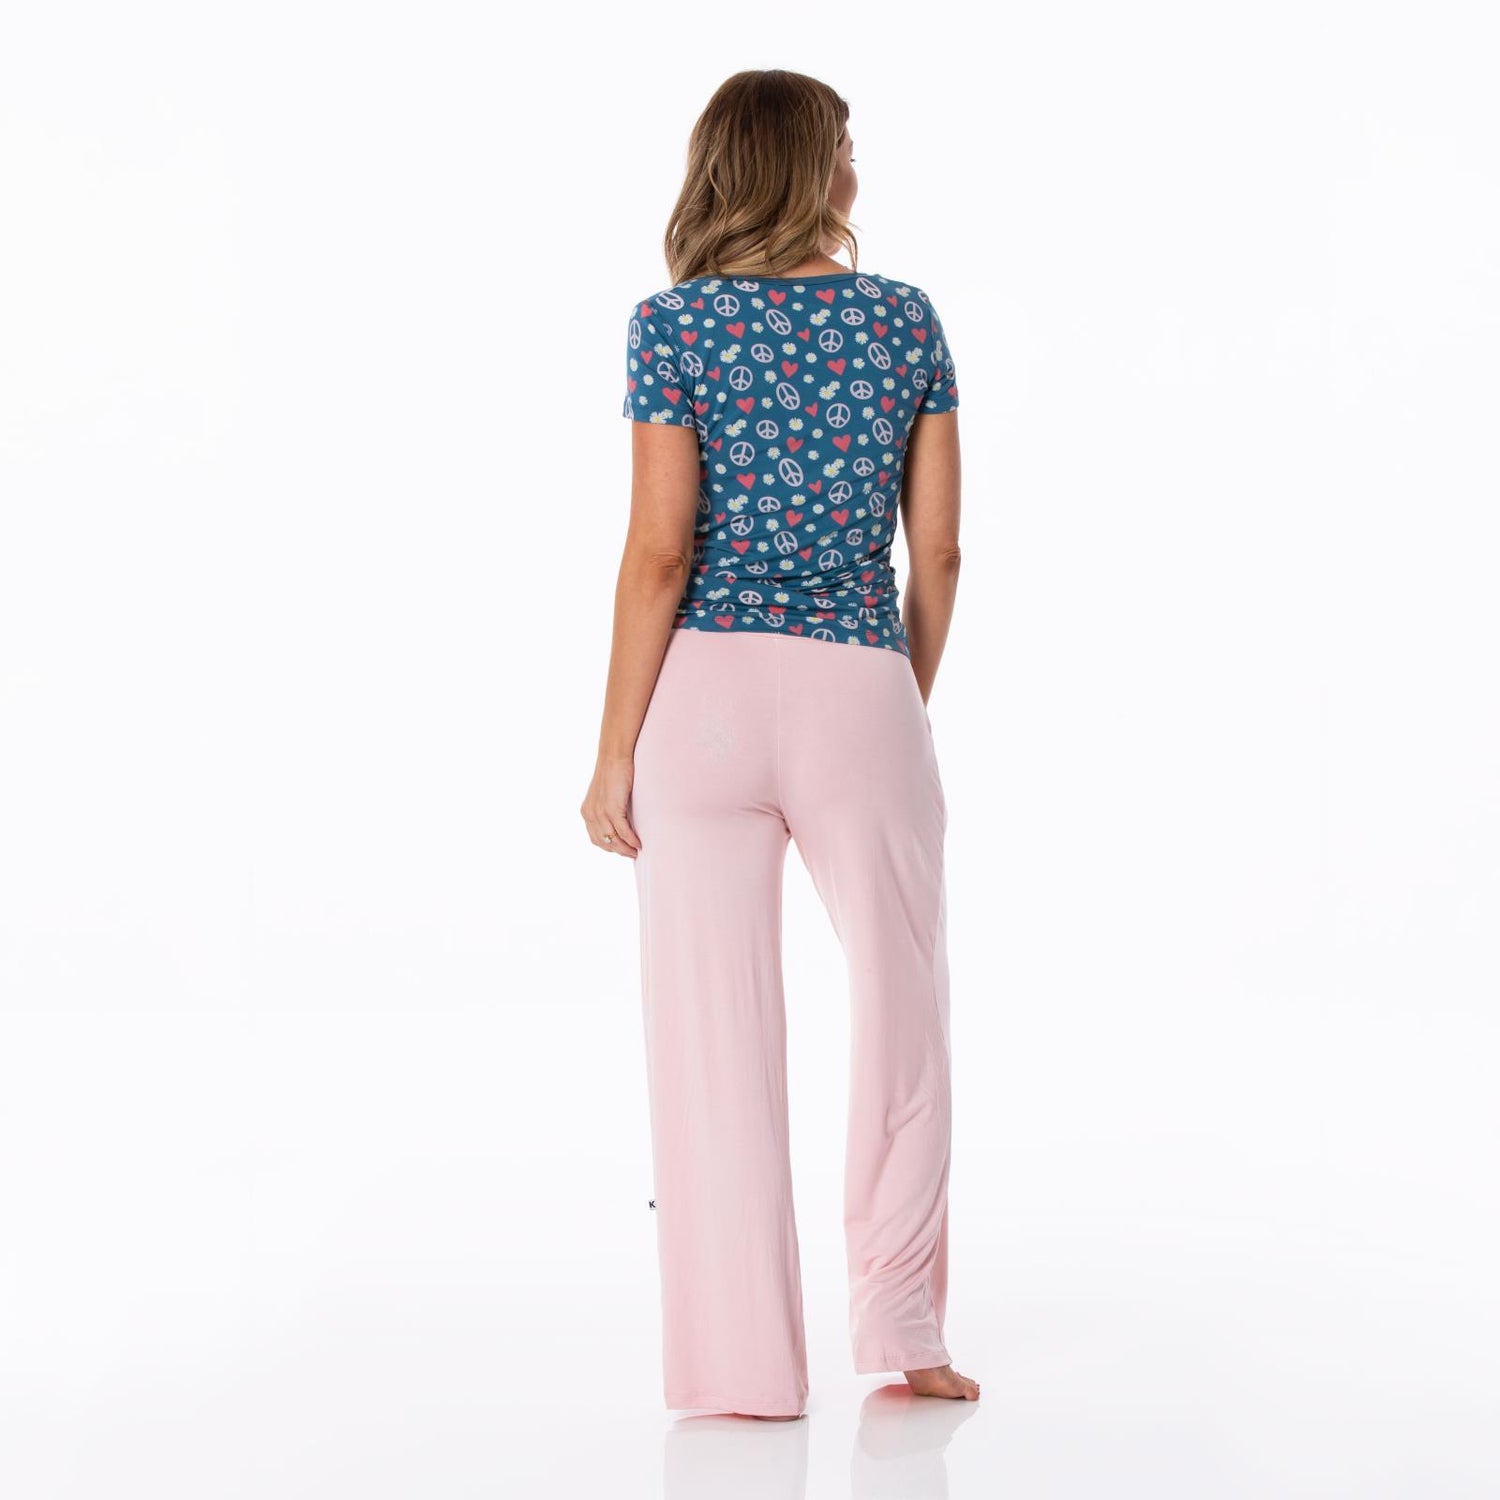 Women's Solid Lounge Pants in Baby Rose